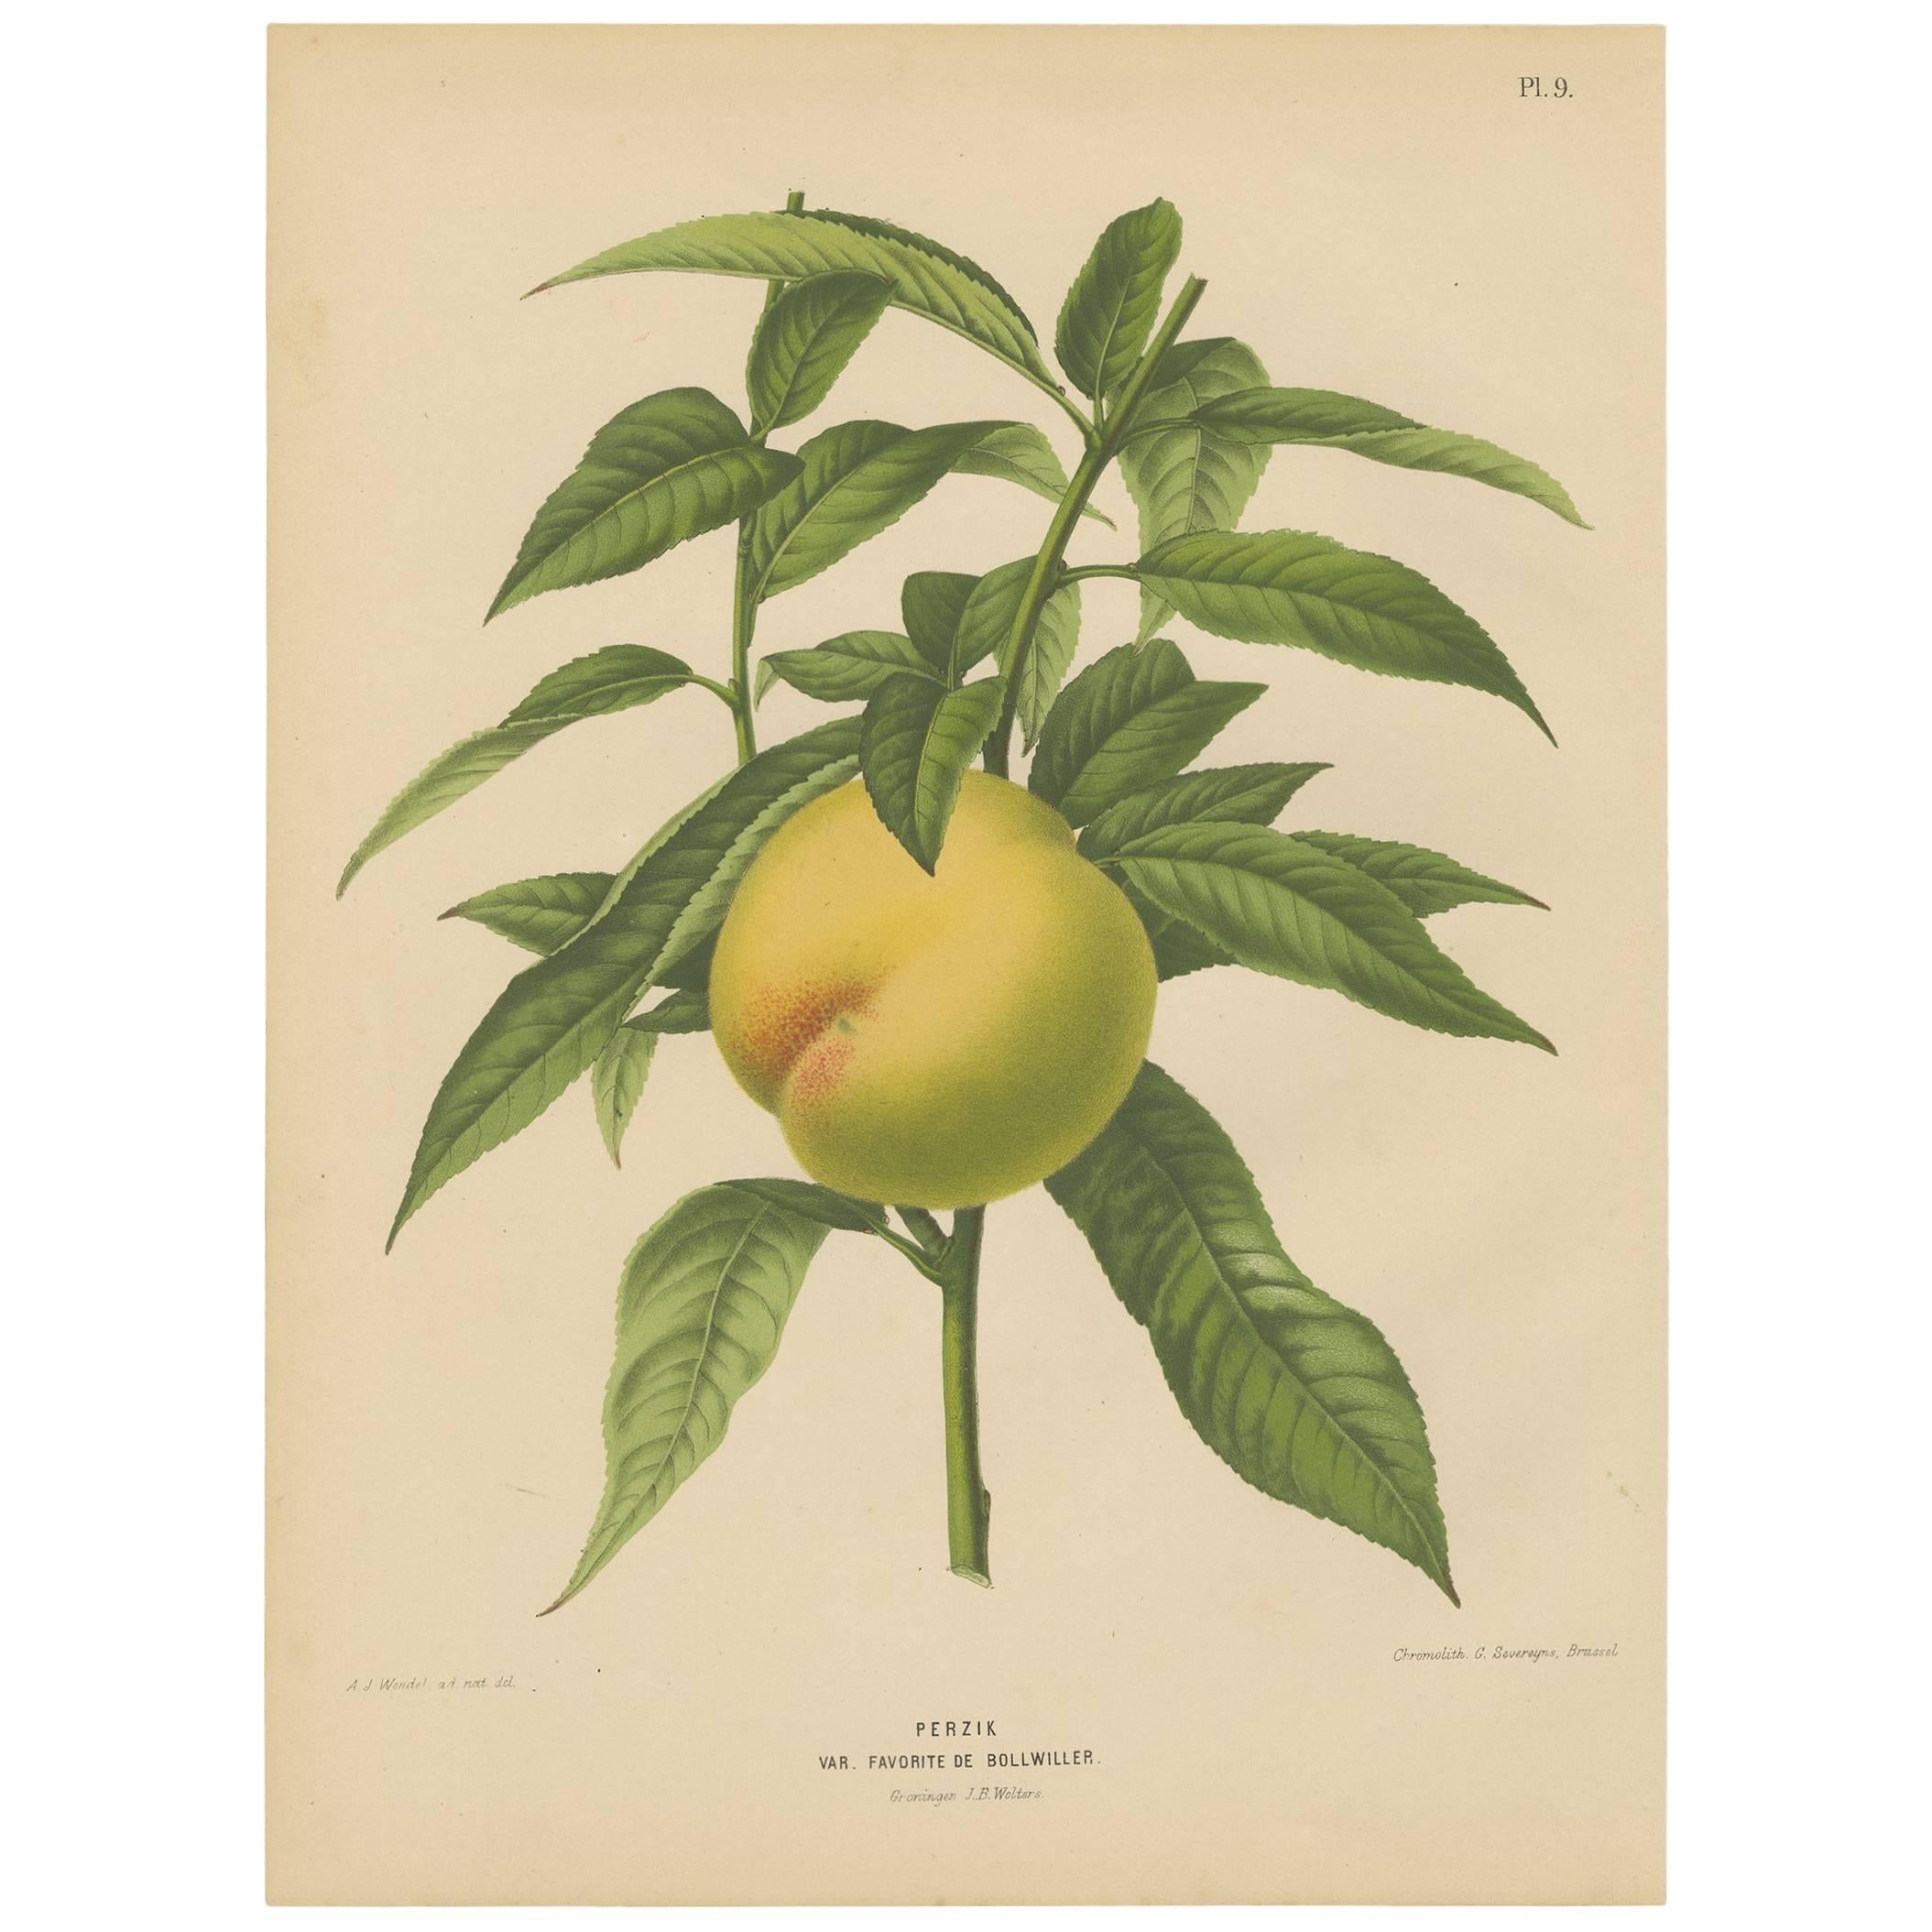 Antique Print of the Bollwiller Peach by G. Severeyns, 1876